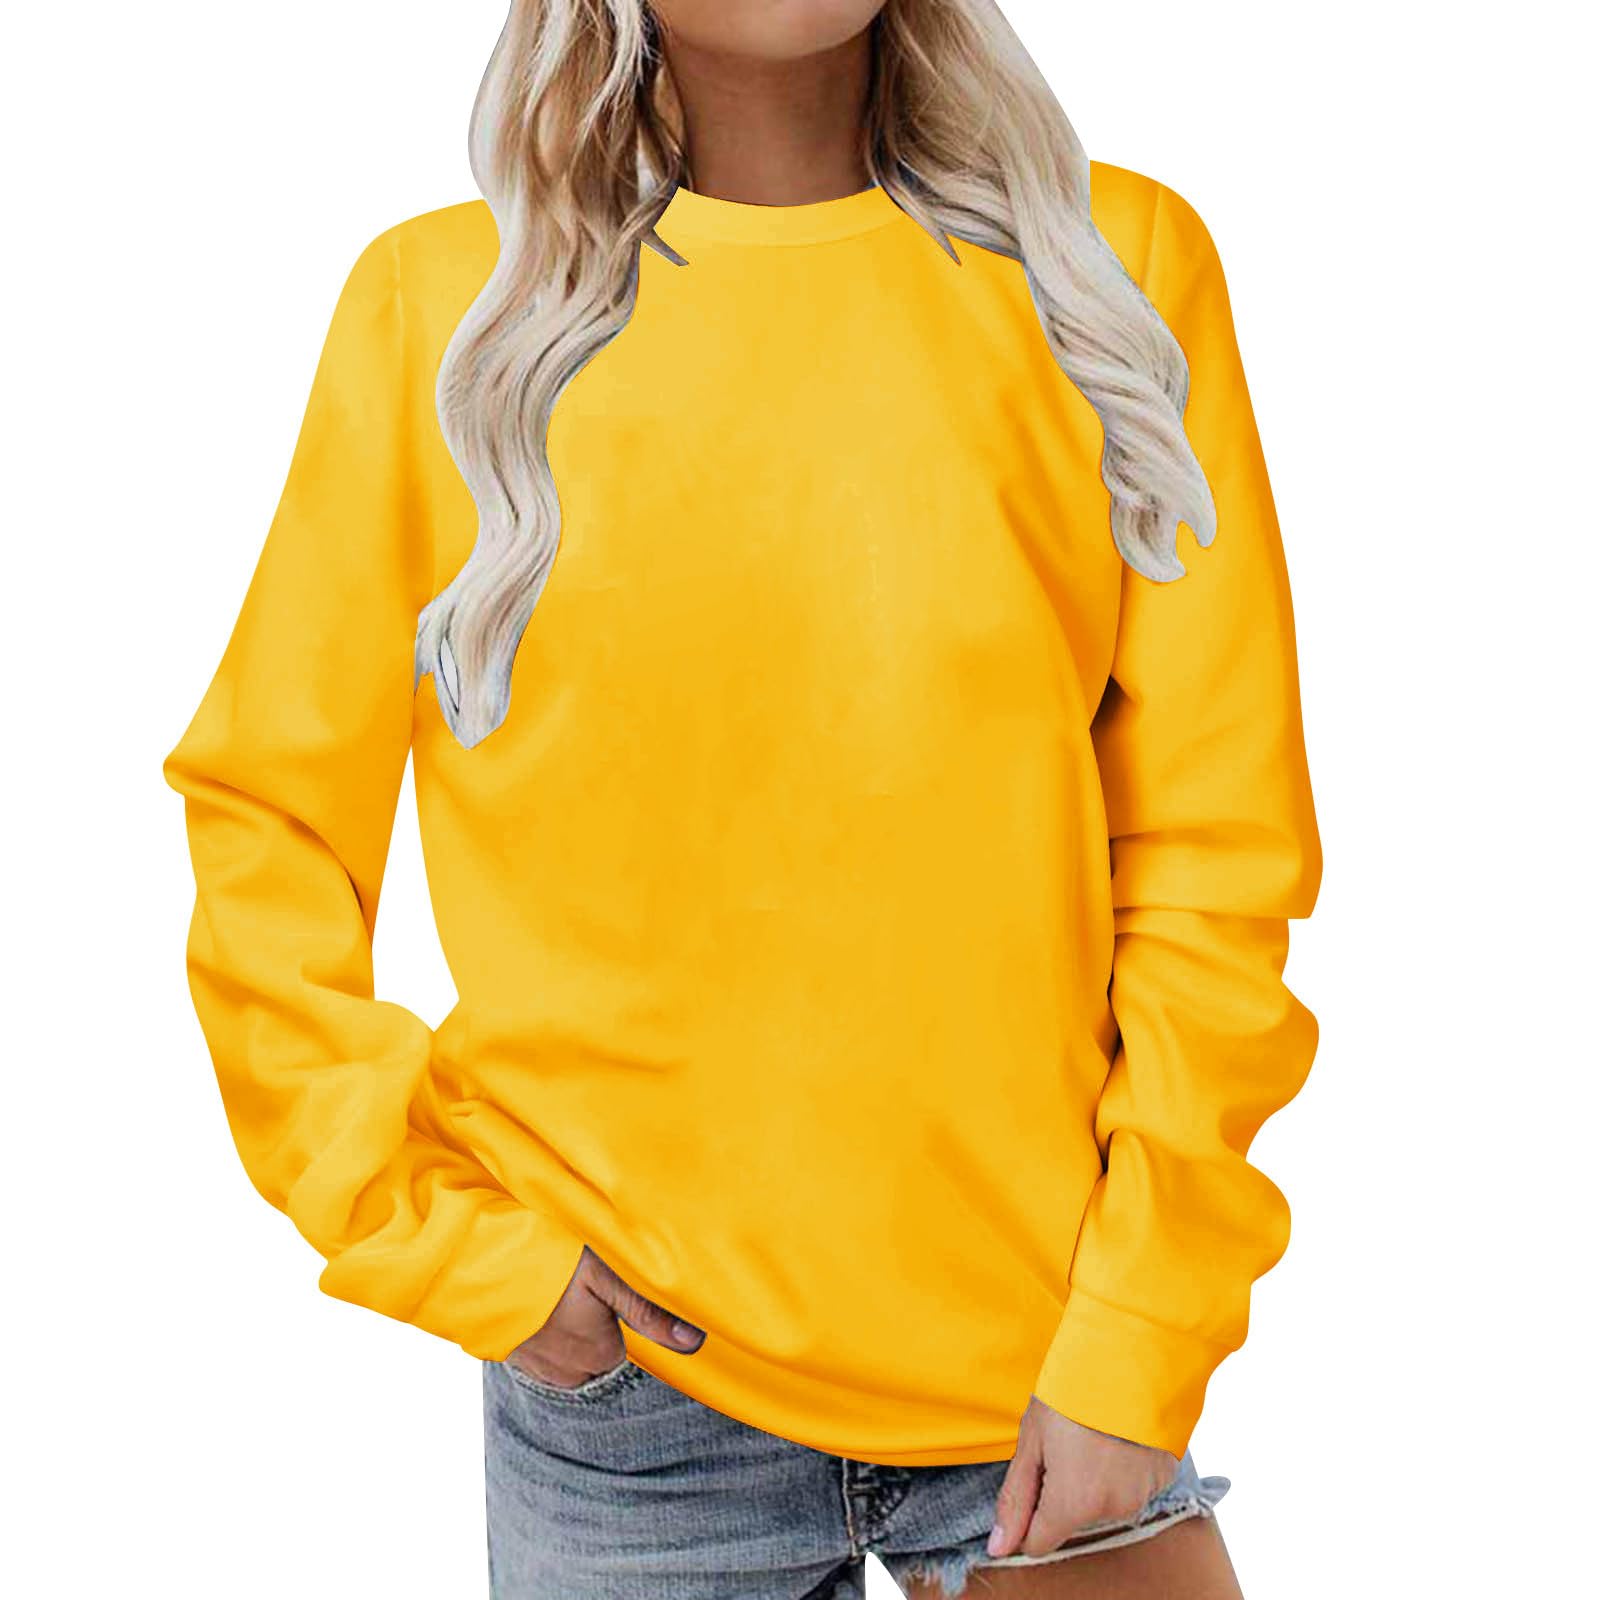 lightning deals of today prime Fall Sweatshirts For Women Fashion Solid Long Sleeve Crewneck Tunic Shirts Casual Loose Comfy Pullover Tops Hoodie Sweaters For Women Yellow L